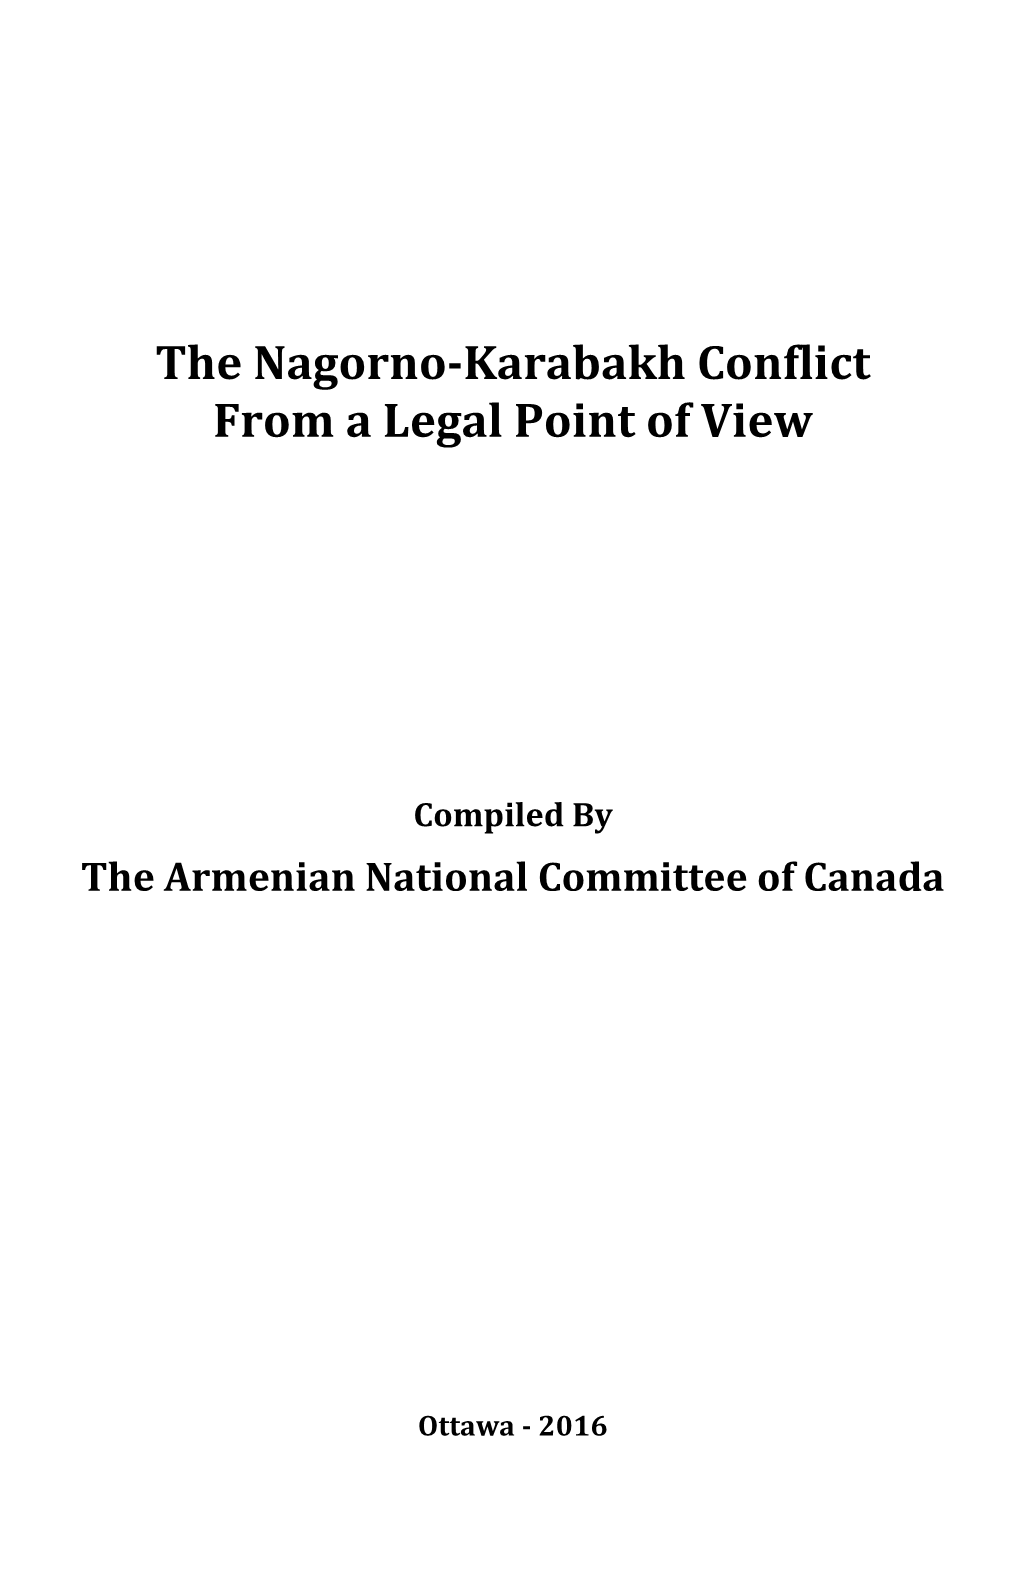 The Nagorno-Karabakh Conflict from a Legal Point of View